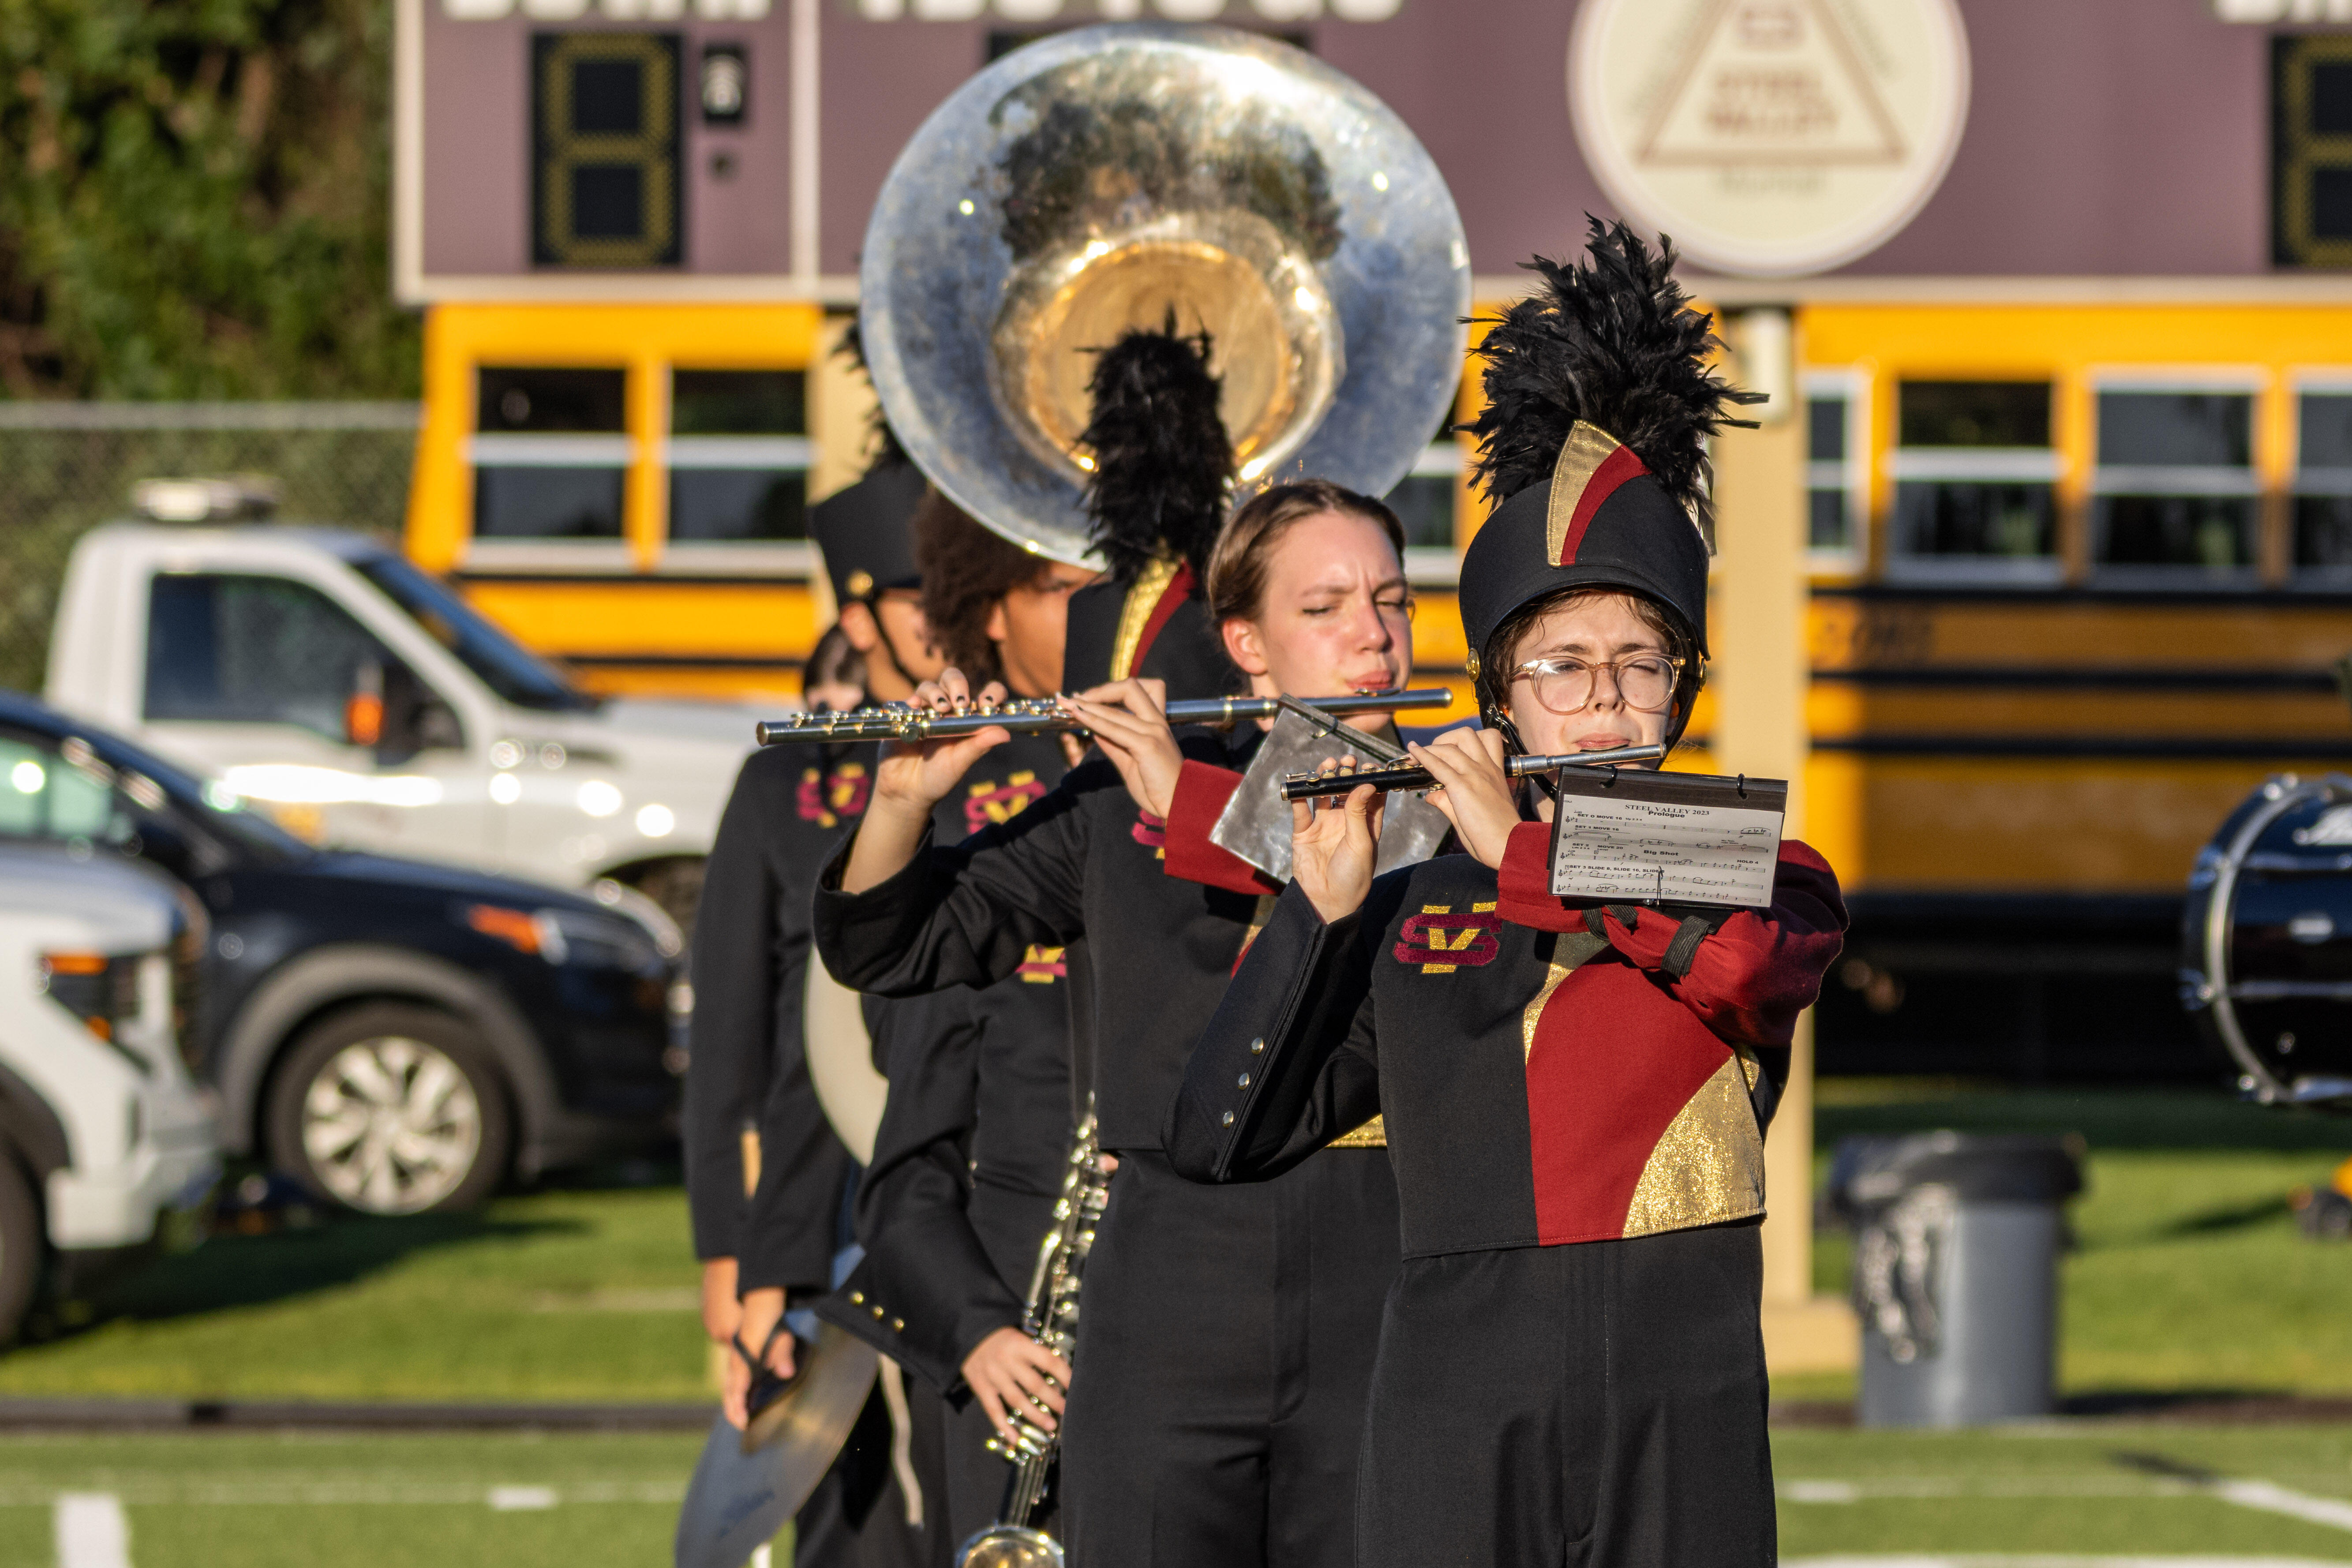 The Steel Valley Marching Band performs